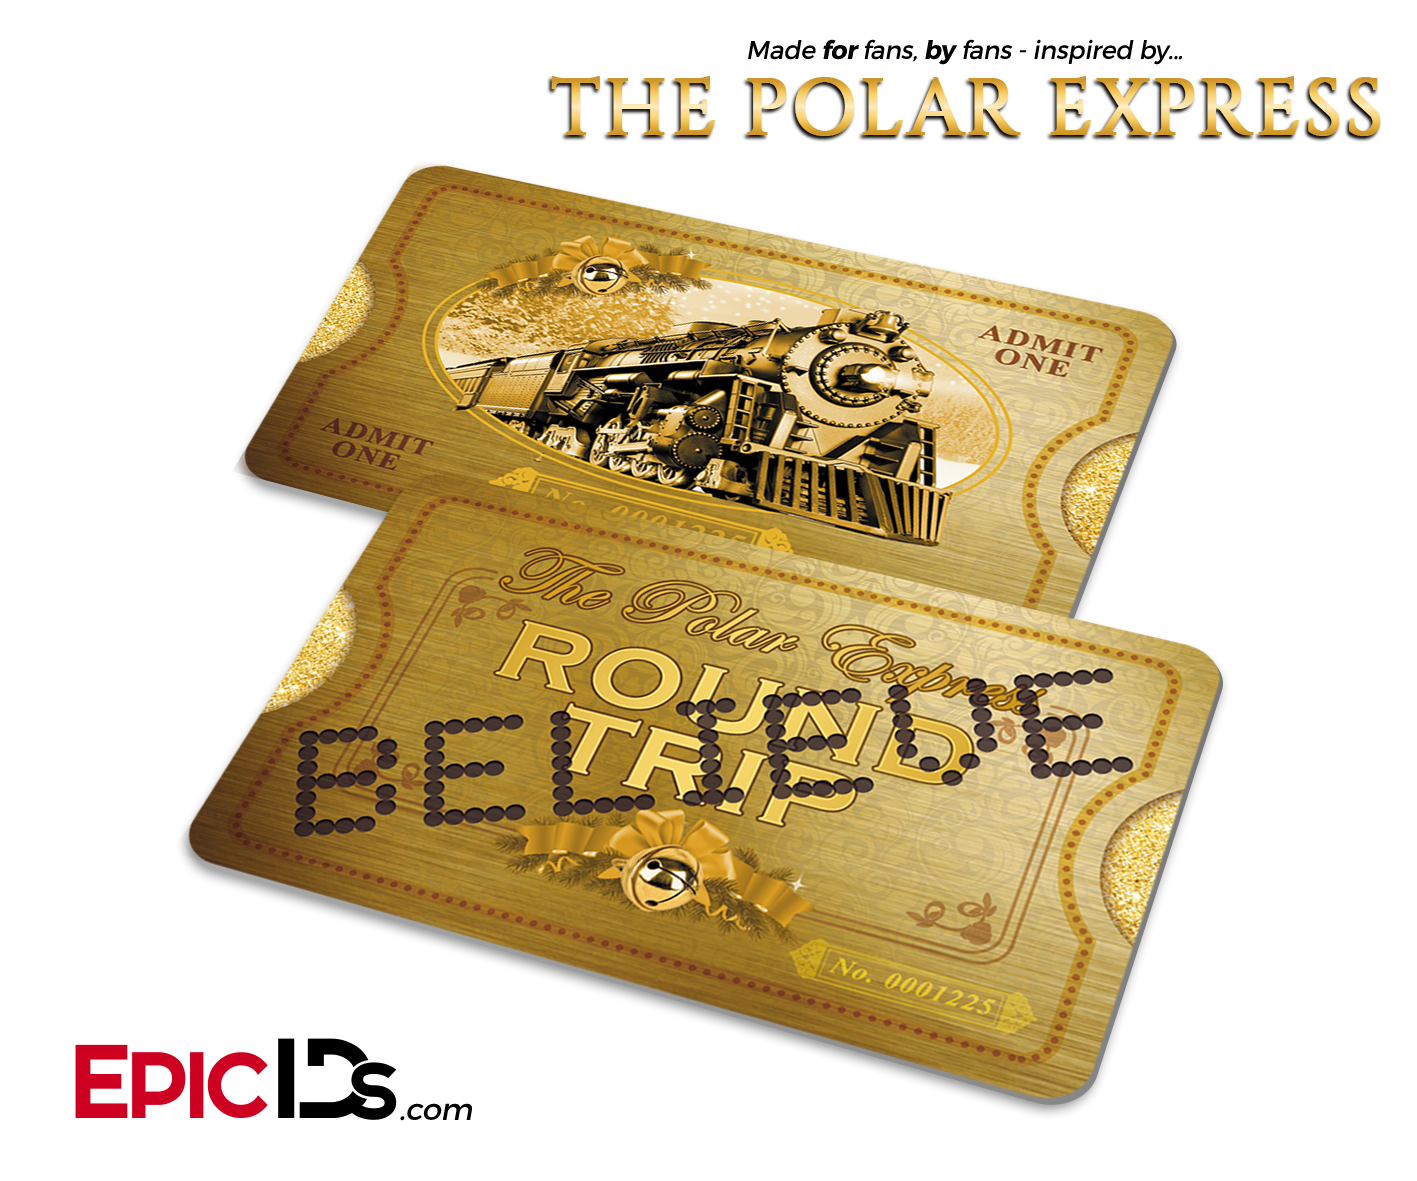 The Polar Express Inspired North Pole 'Believe' Train Ticket (Card)